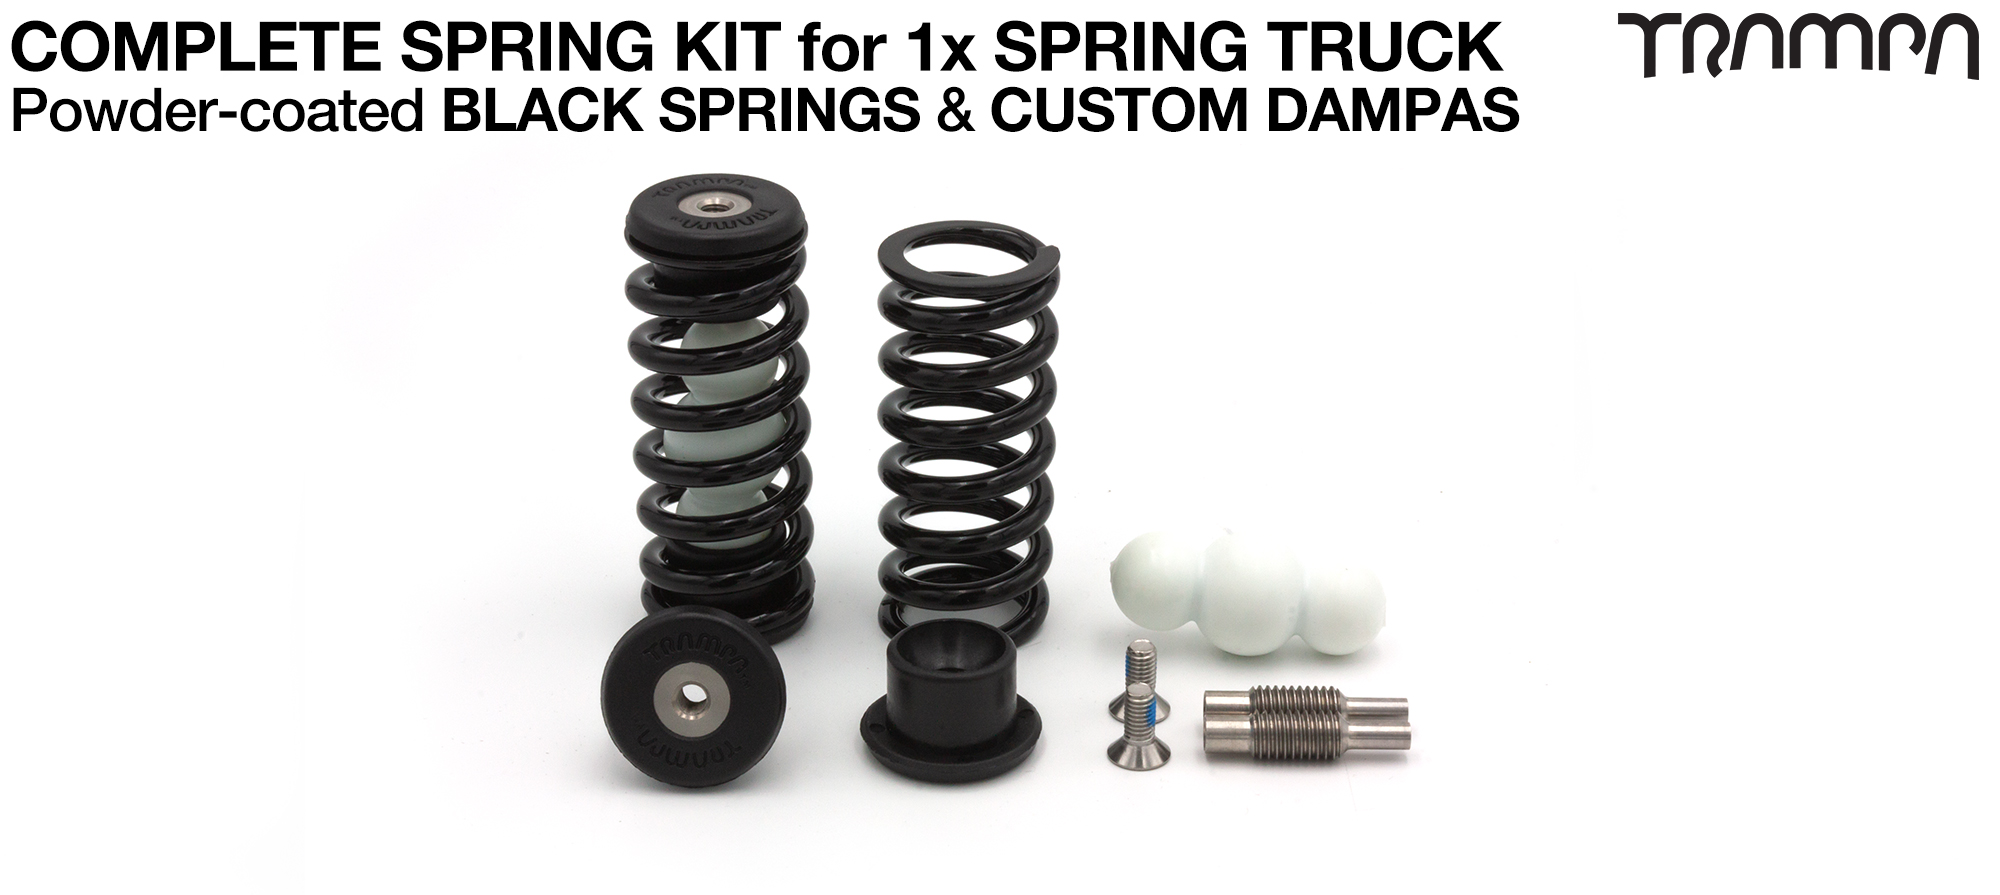 Spring kit Complete for 1x Truck - 2x Spring 2x Dampa 4x Spring Retainers 2x Spring Adjuster & 2 M5x12mm Countersunk Bolt  BLACK Springs 